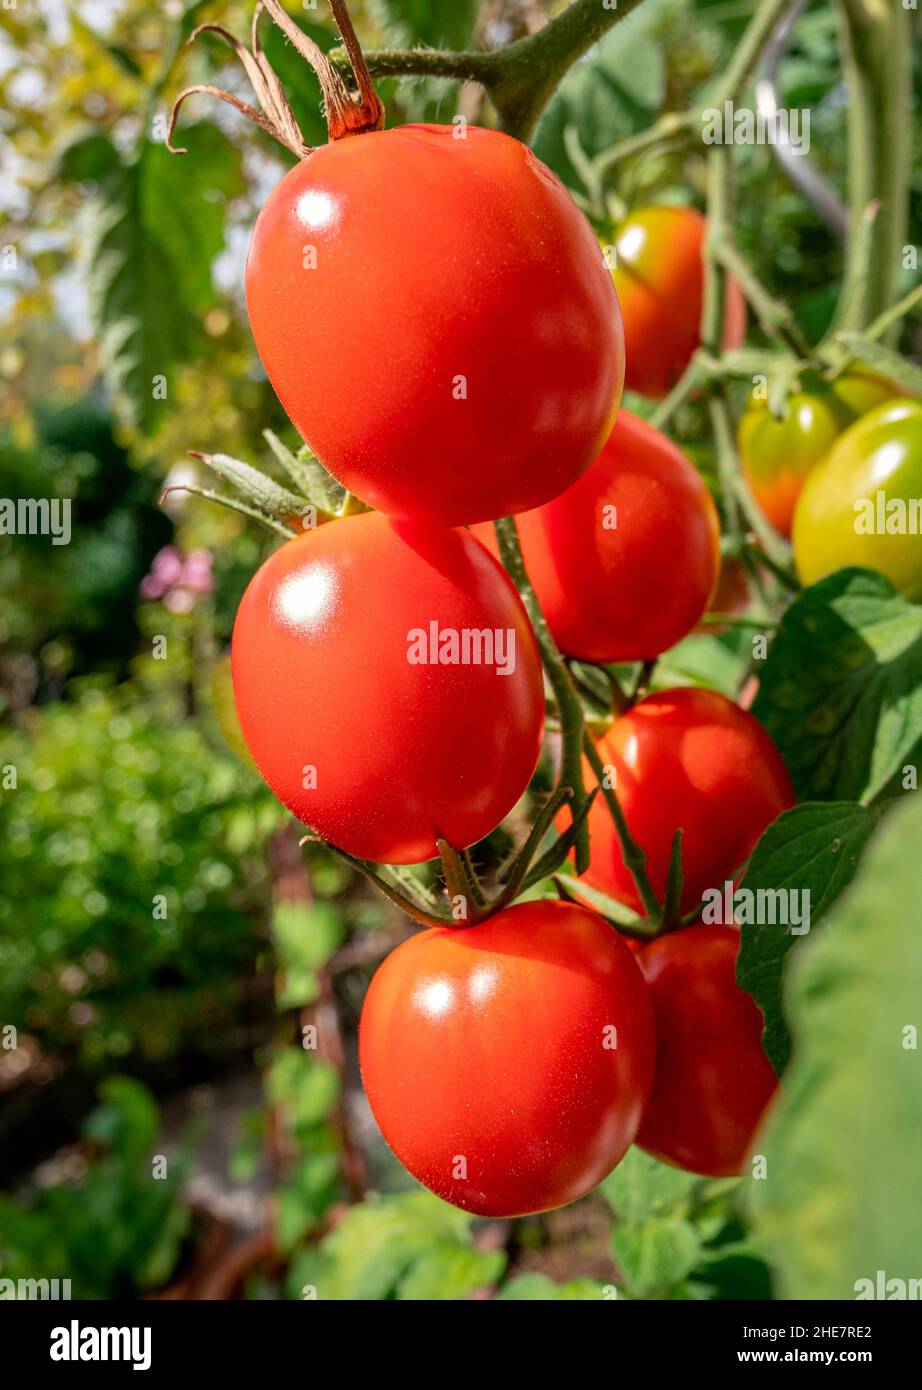 Ripe red tomatoes Stock Photo